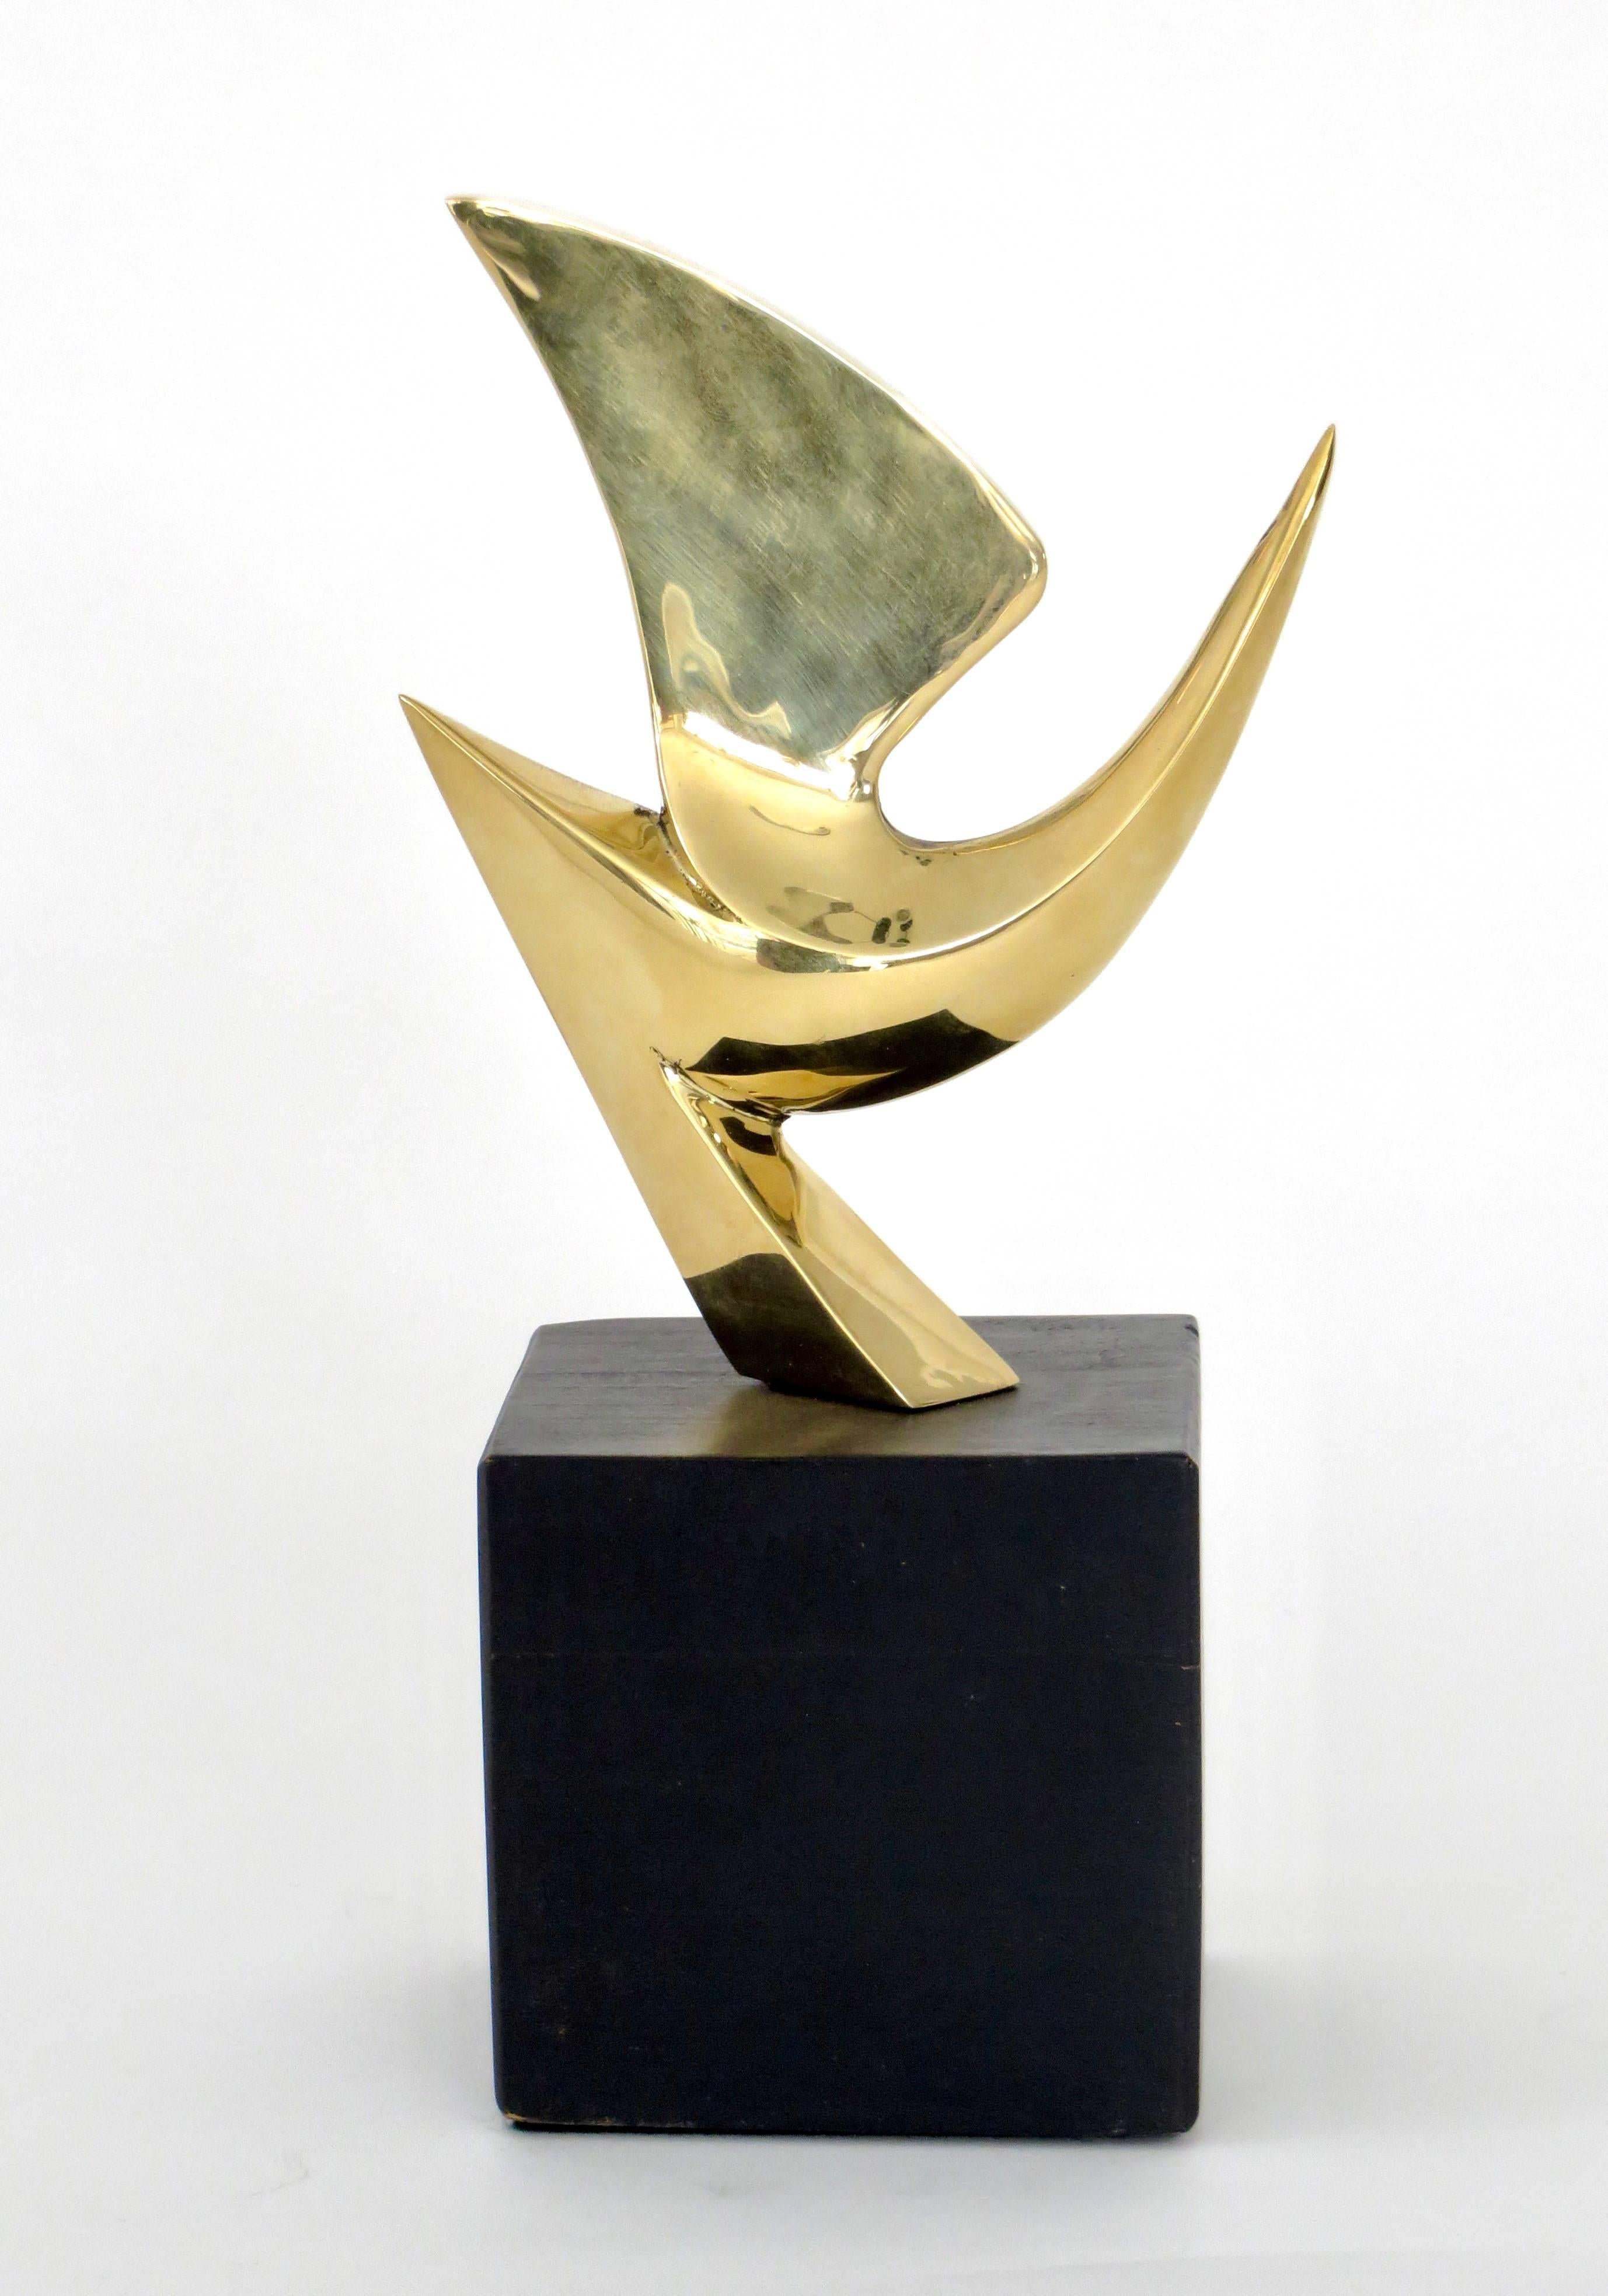 A cast bronze bird sculpture by Philippe Jean, French artist, designer and sculptor. 
Mounted on a black wood cube base. 
Signed and numbered. PhJean 85/300
A Classic motif for the artist.
Total height with base is 9.5